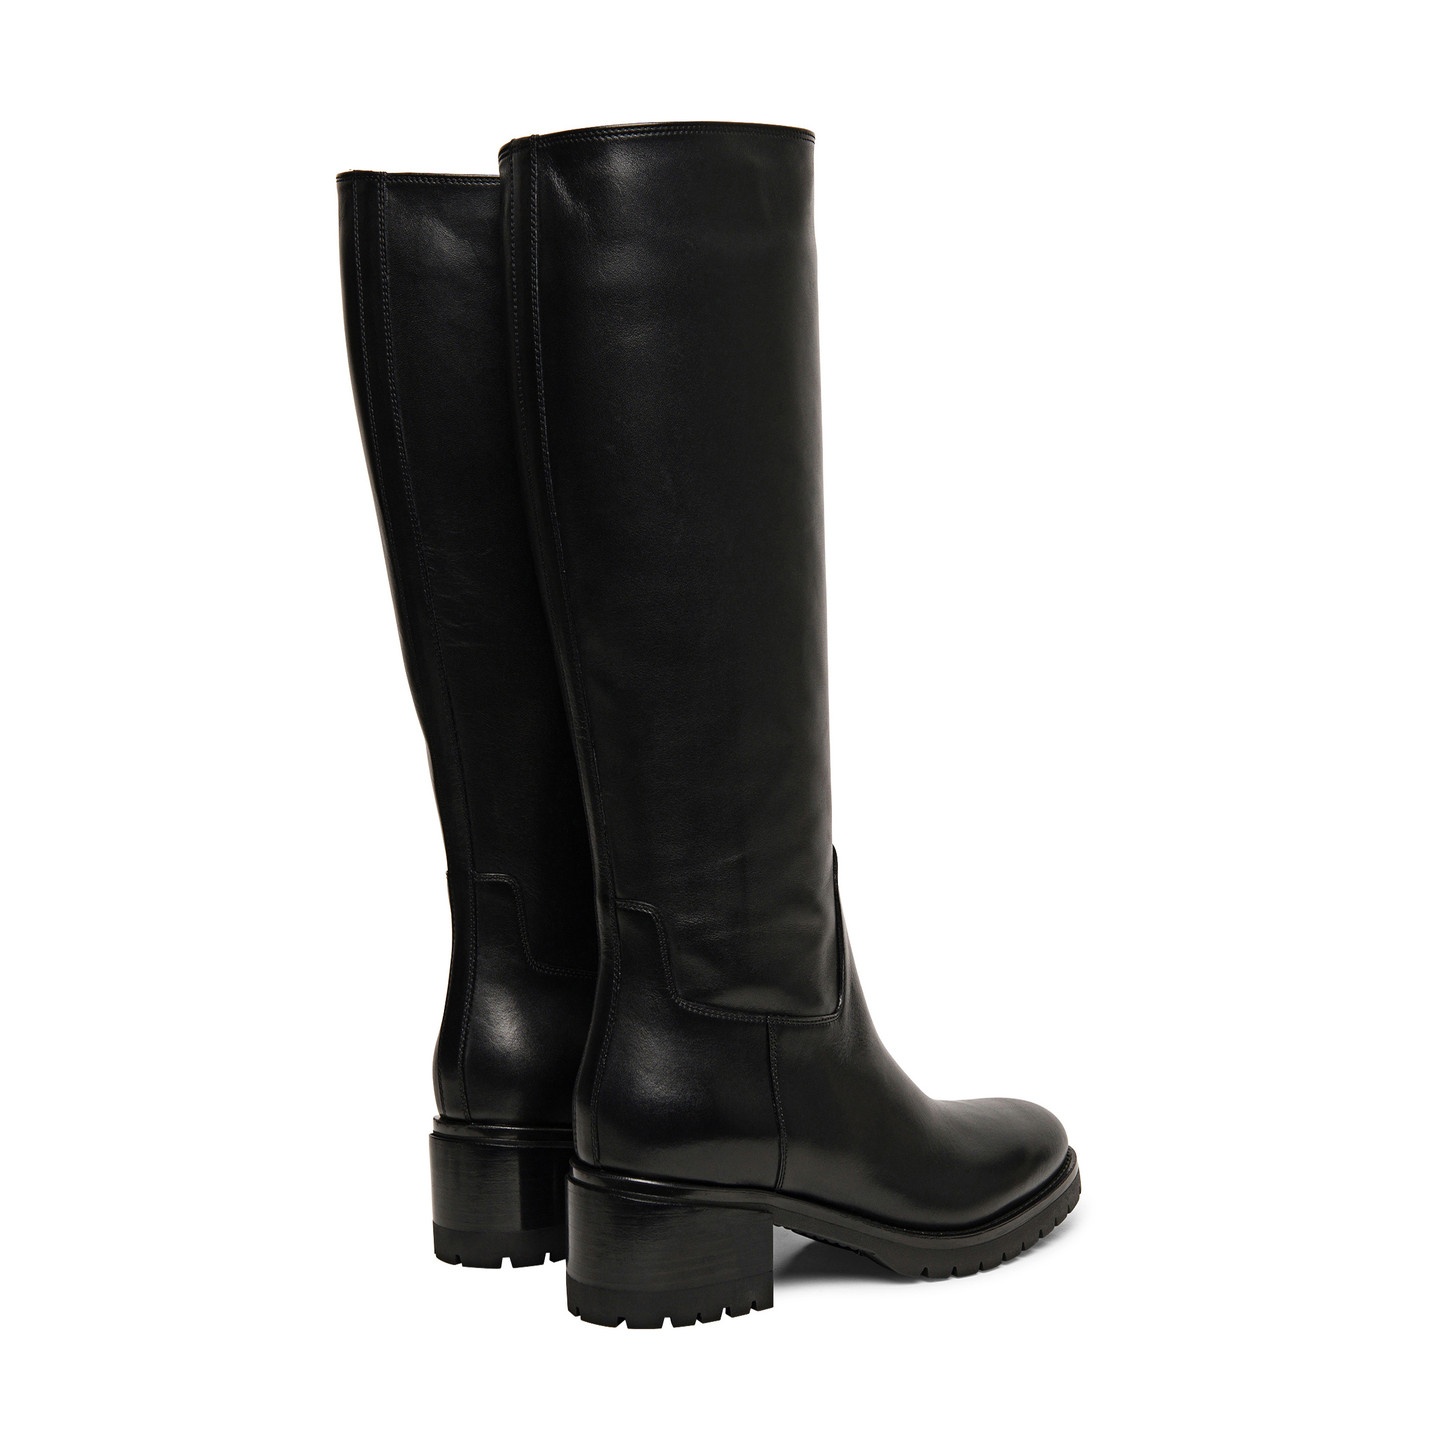 Women’s black leather boot - 3